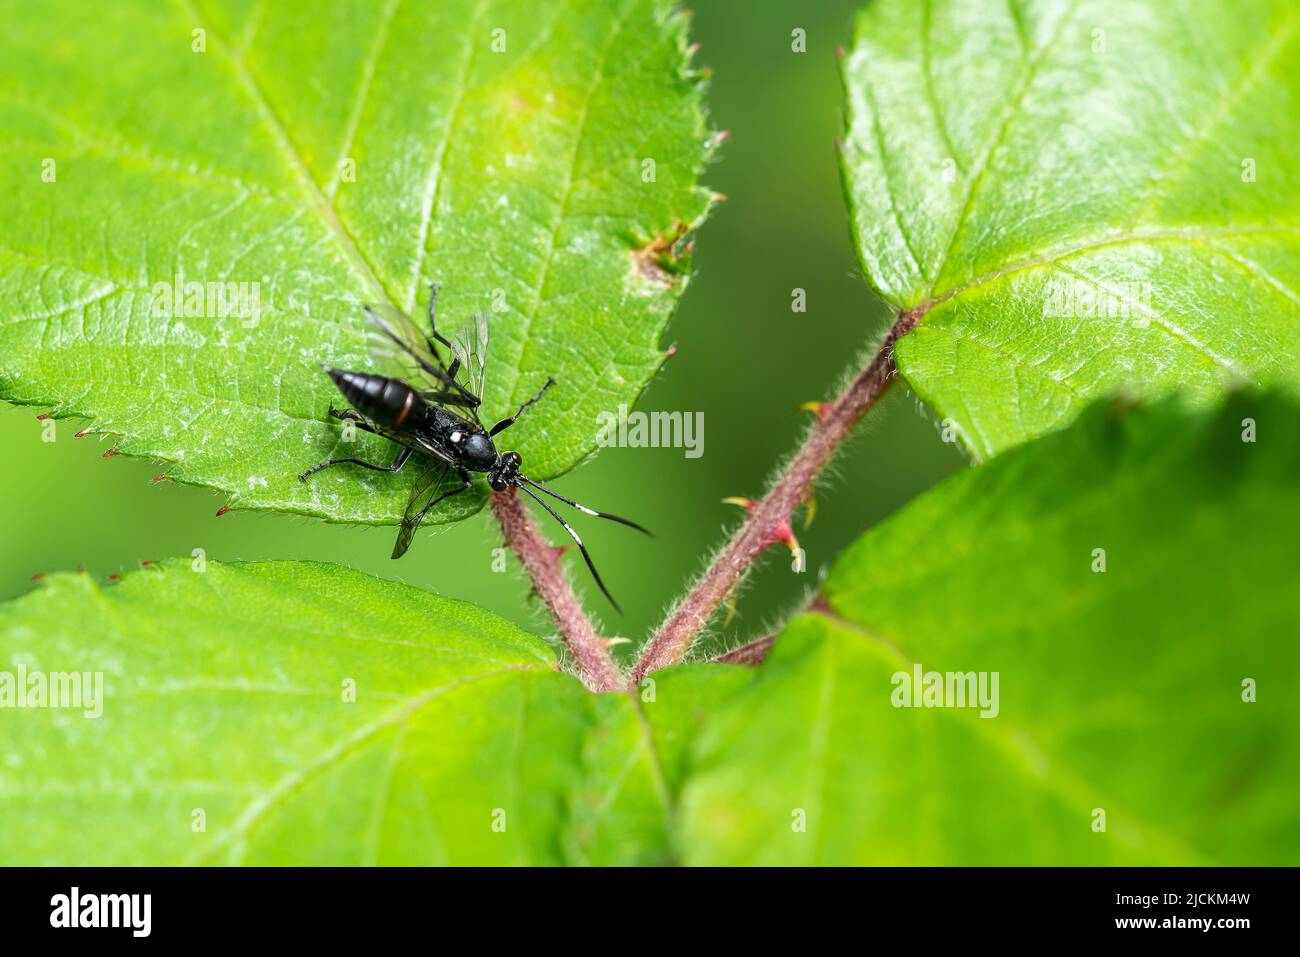 Ichneumonid wasp (Ichneumon Coelichneumon) a parasitic black flying insect, stock photo image Stock Photo